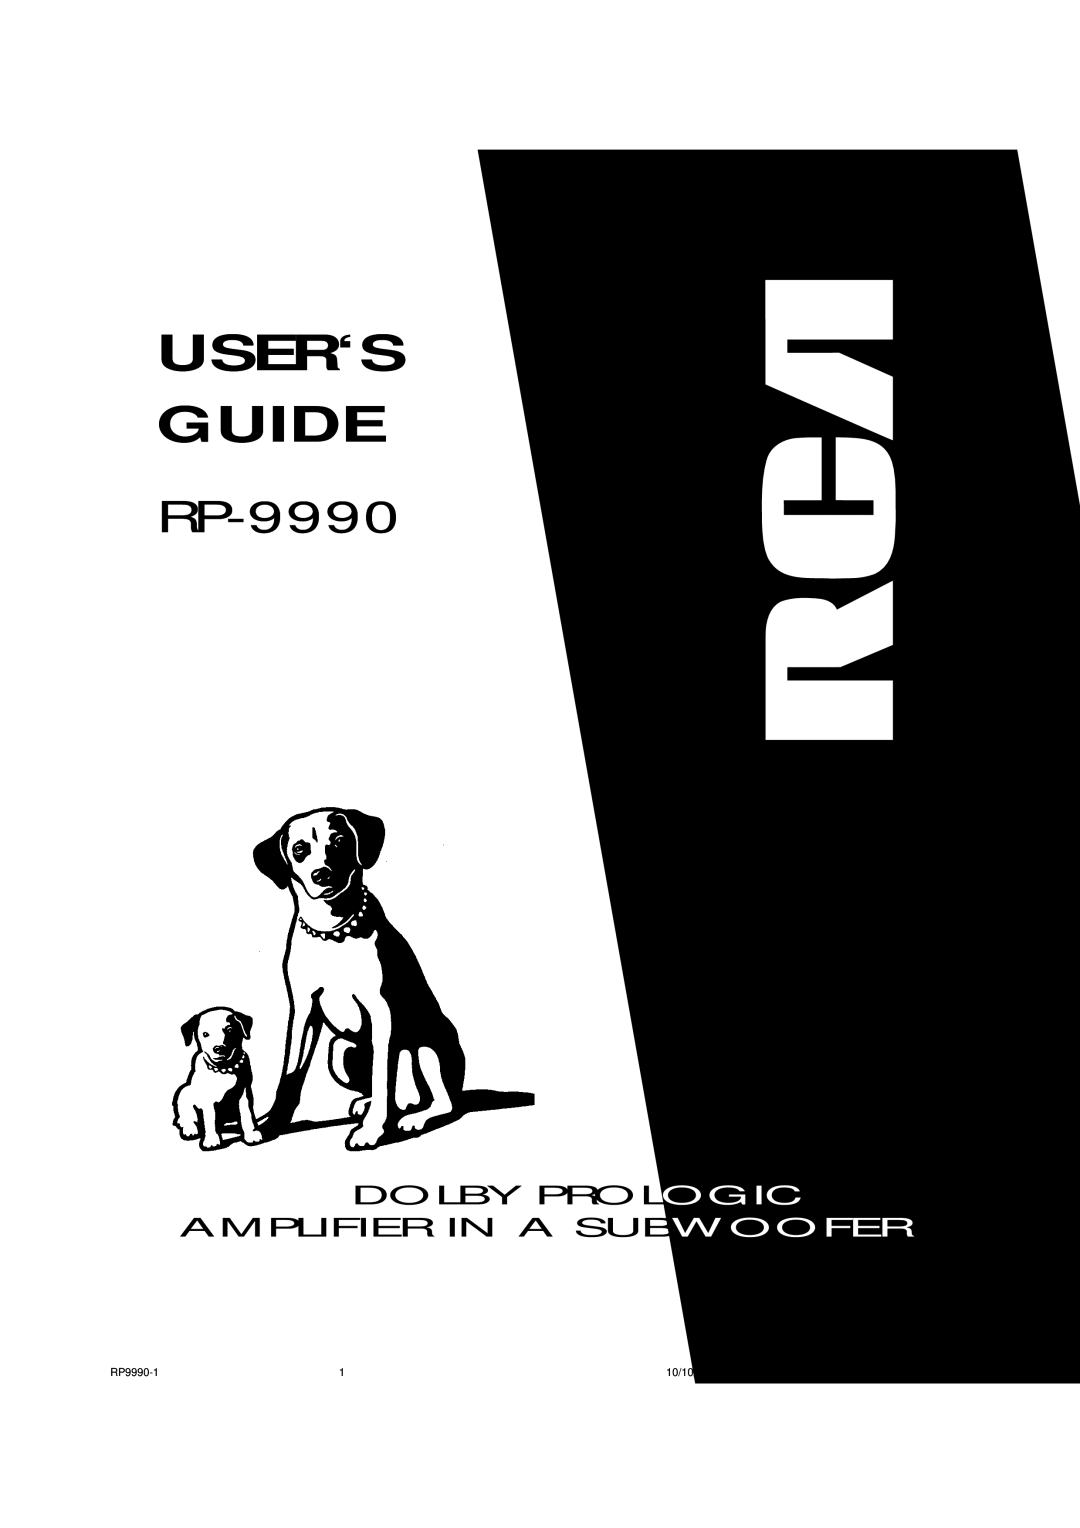 RCA RP-9990 manual User‘S Guide, Dolby Prologic Amplifier In A Subwoofer, RP9990-1, 10/10/00, 11:51 AM 